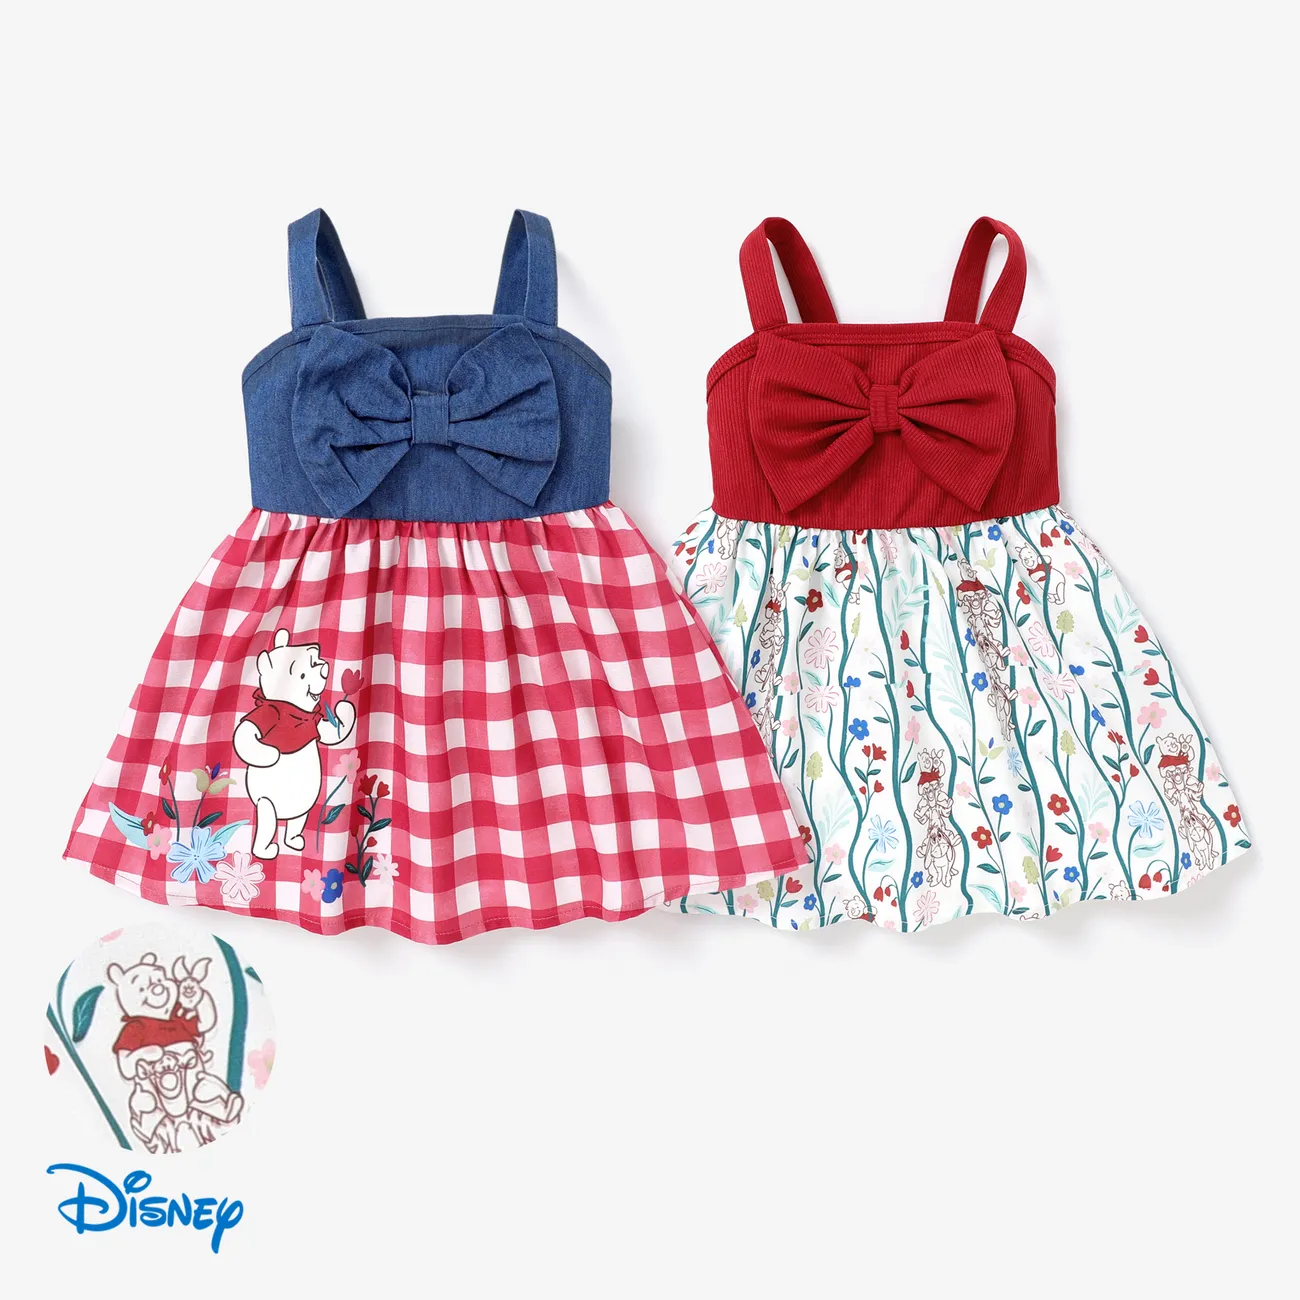 Disney Winnie the Pooh 1pc Baby/Toddler Girl Bowknot Design Plaid/Floral pattern Dress
 Red big image 1